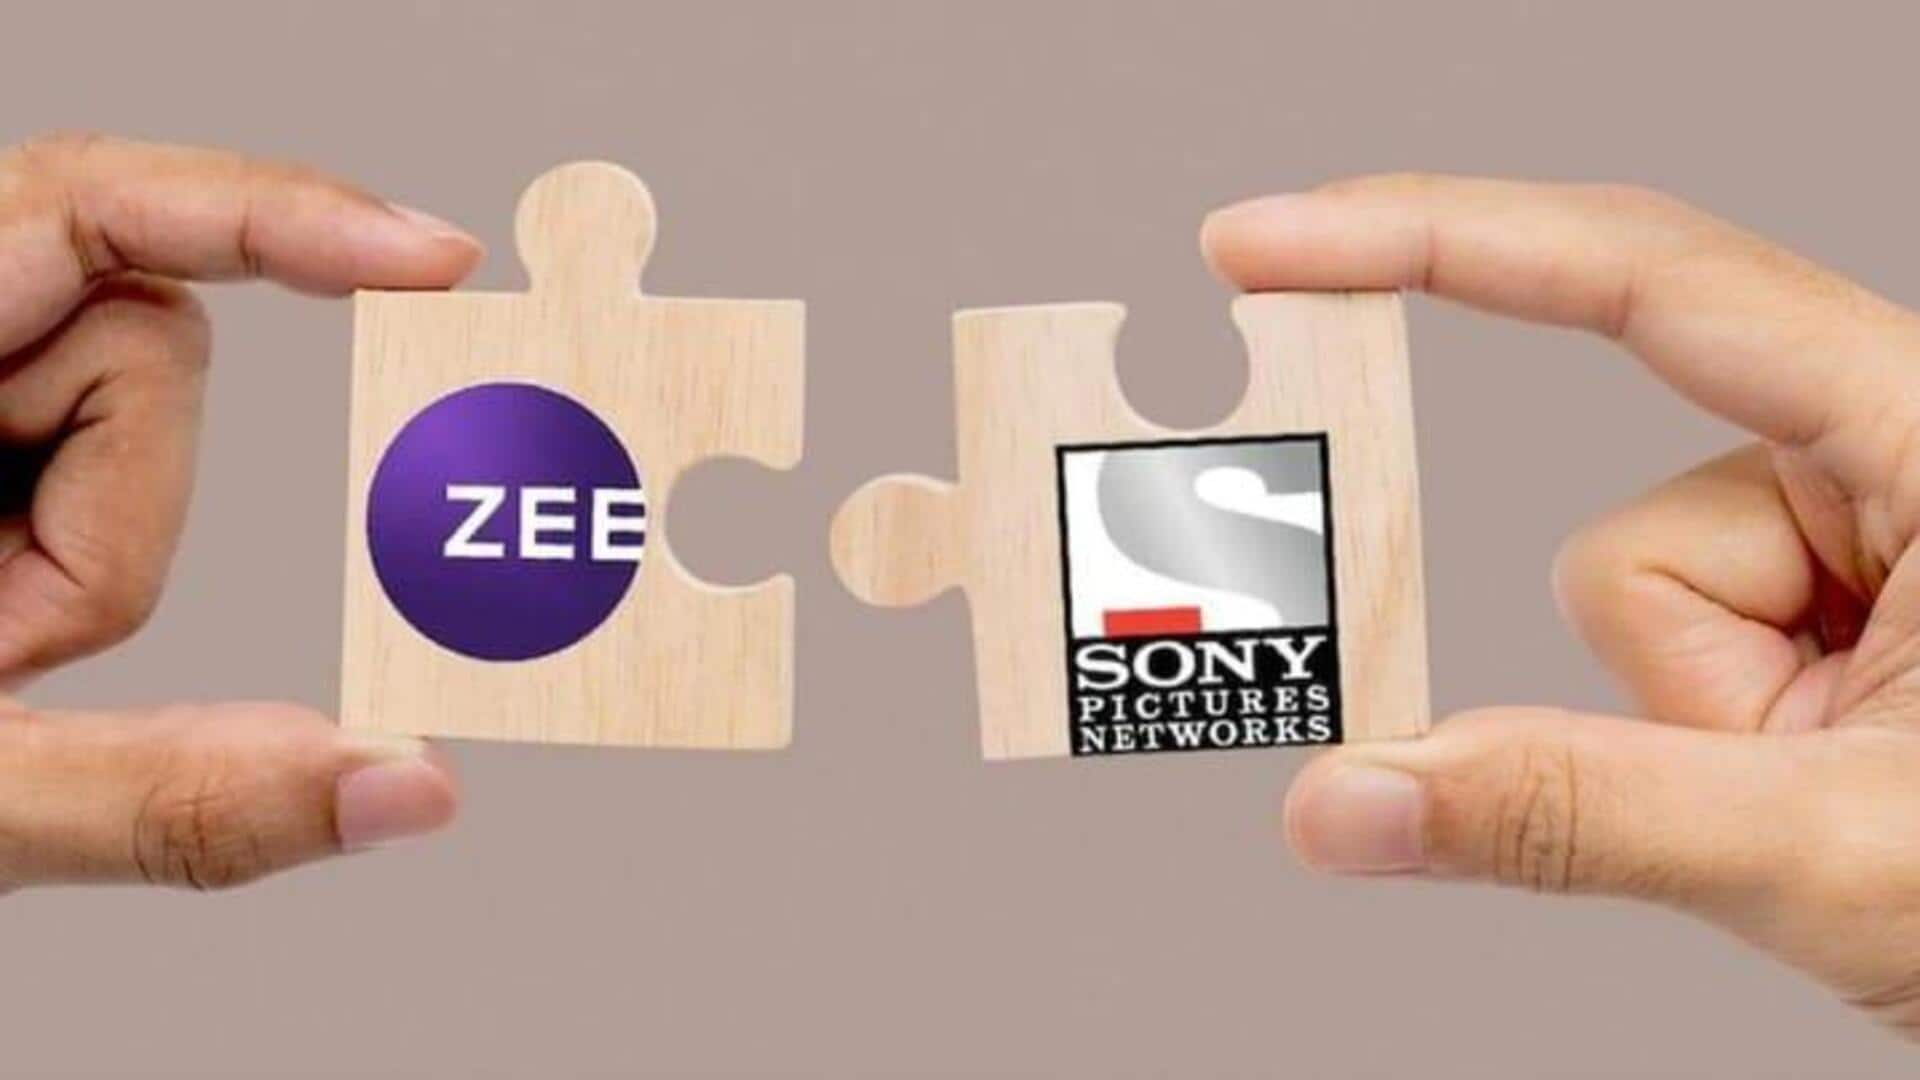 Sony-Zee merger further delayed by few more months: Here's why